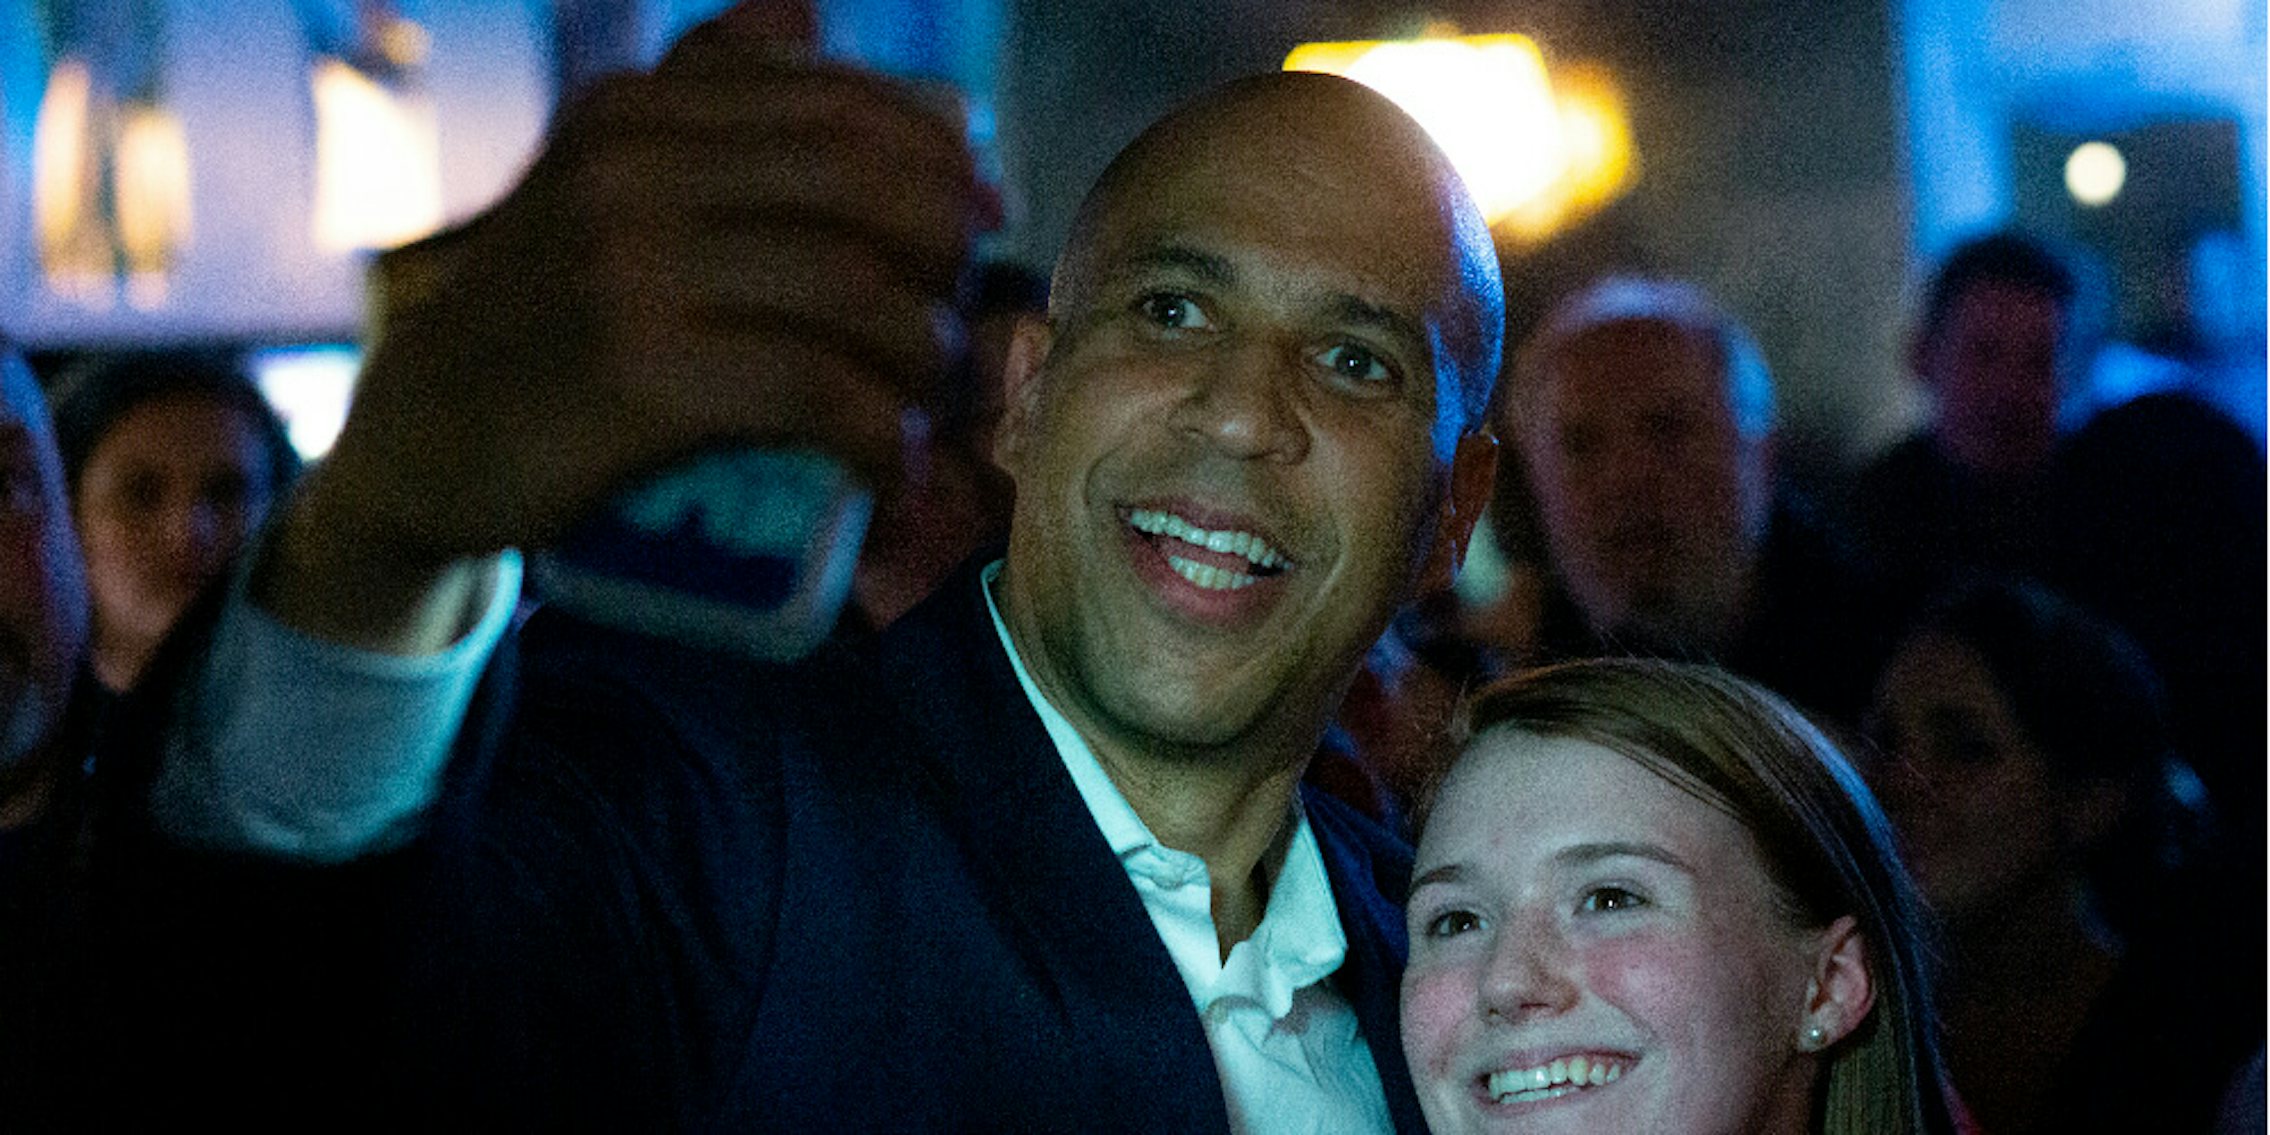 Influencers Offered Money For Cory Booker Sponcon